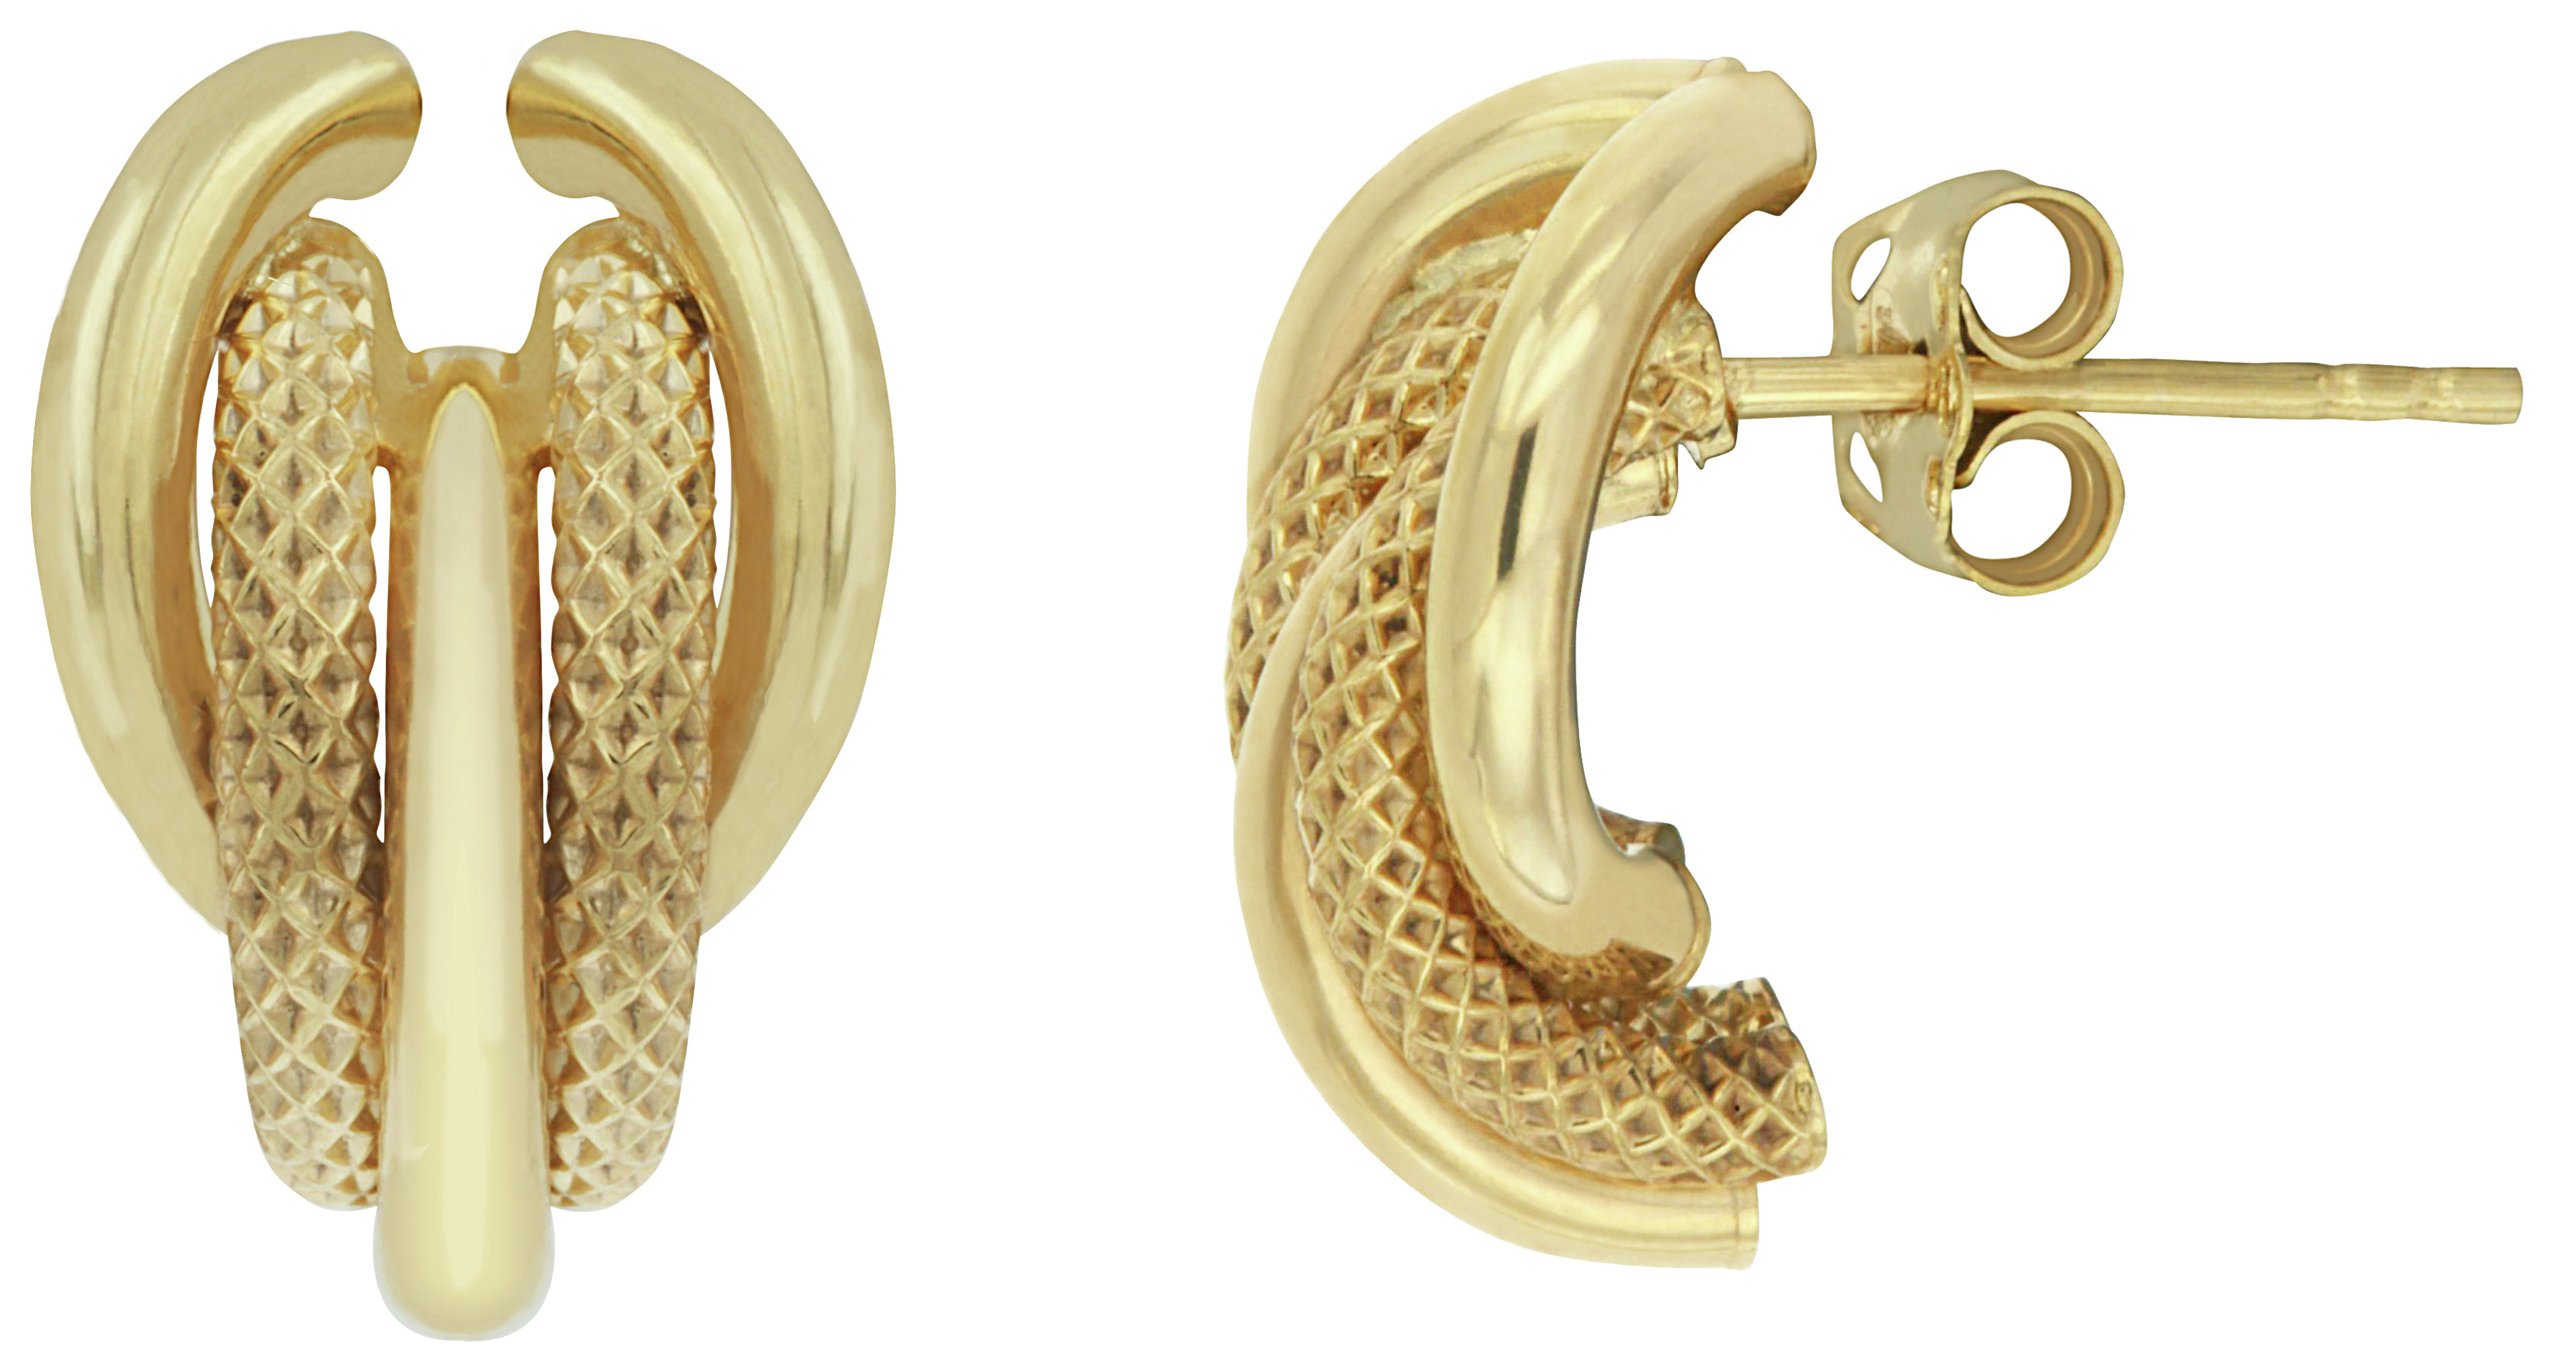 EAN 5055860300000 product image for Bracci 9ct Gold Textured Stud Earrings | upcitemdb.com